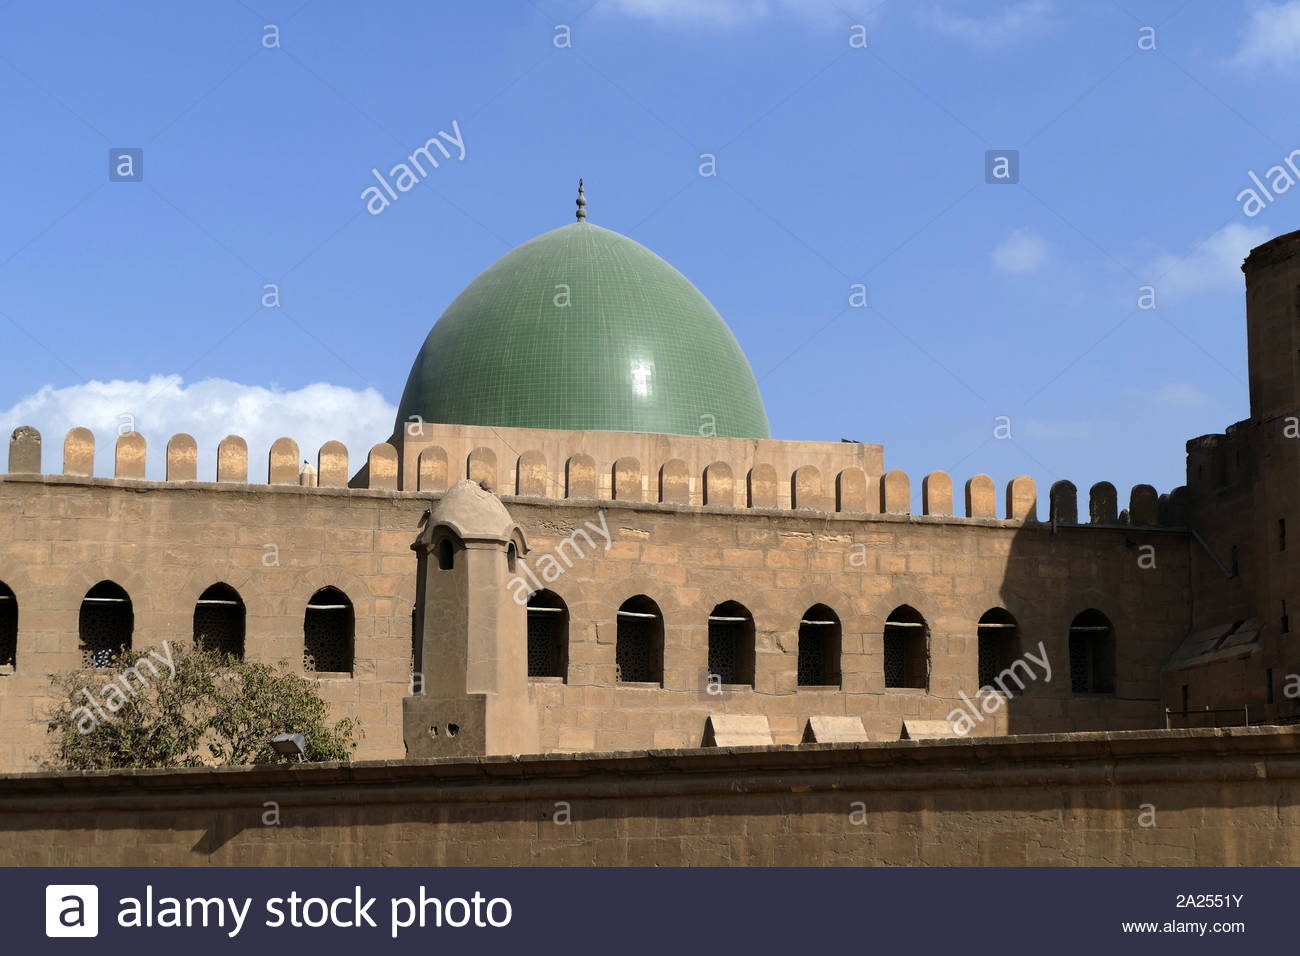 The Sultan al-Nasir Muhammad ibn Qala'un Mosque is an early 14th-century mosque at the Citadel in Cairo, Egypt. It was built by the Mamluk sultan Al-Nasr Muhammad in 1318 as the royal mosque of the Citadel, where the sultans of Cairo performed their Friday prayers. Stock Photo